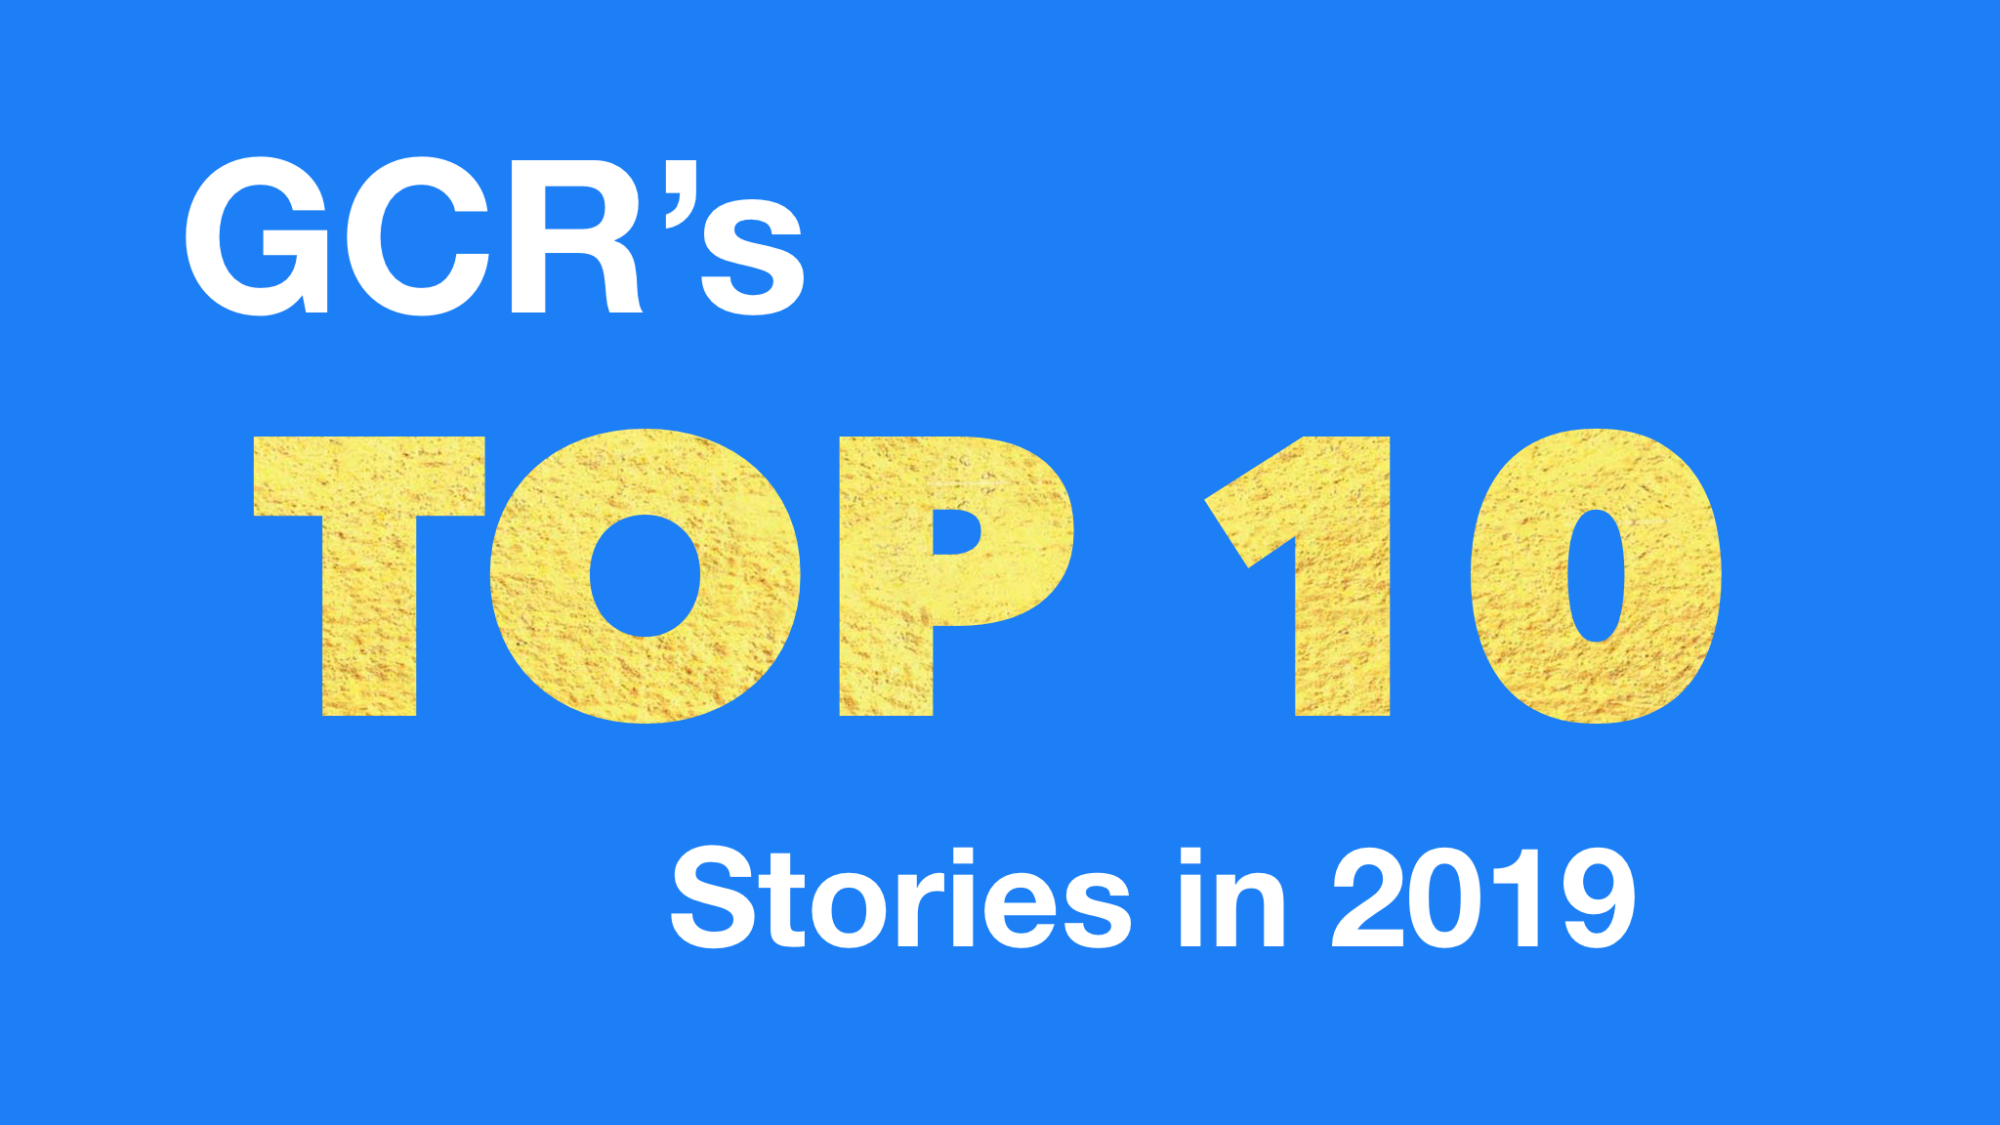 Global Coin Research’s Top 10 Stories of 2019